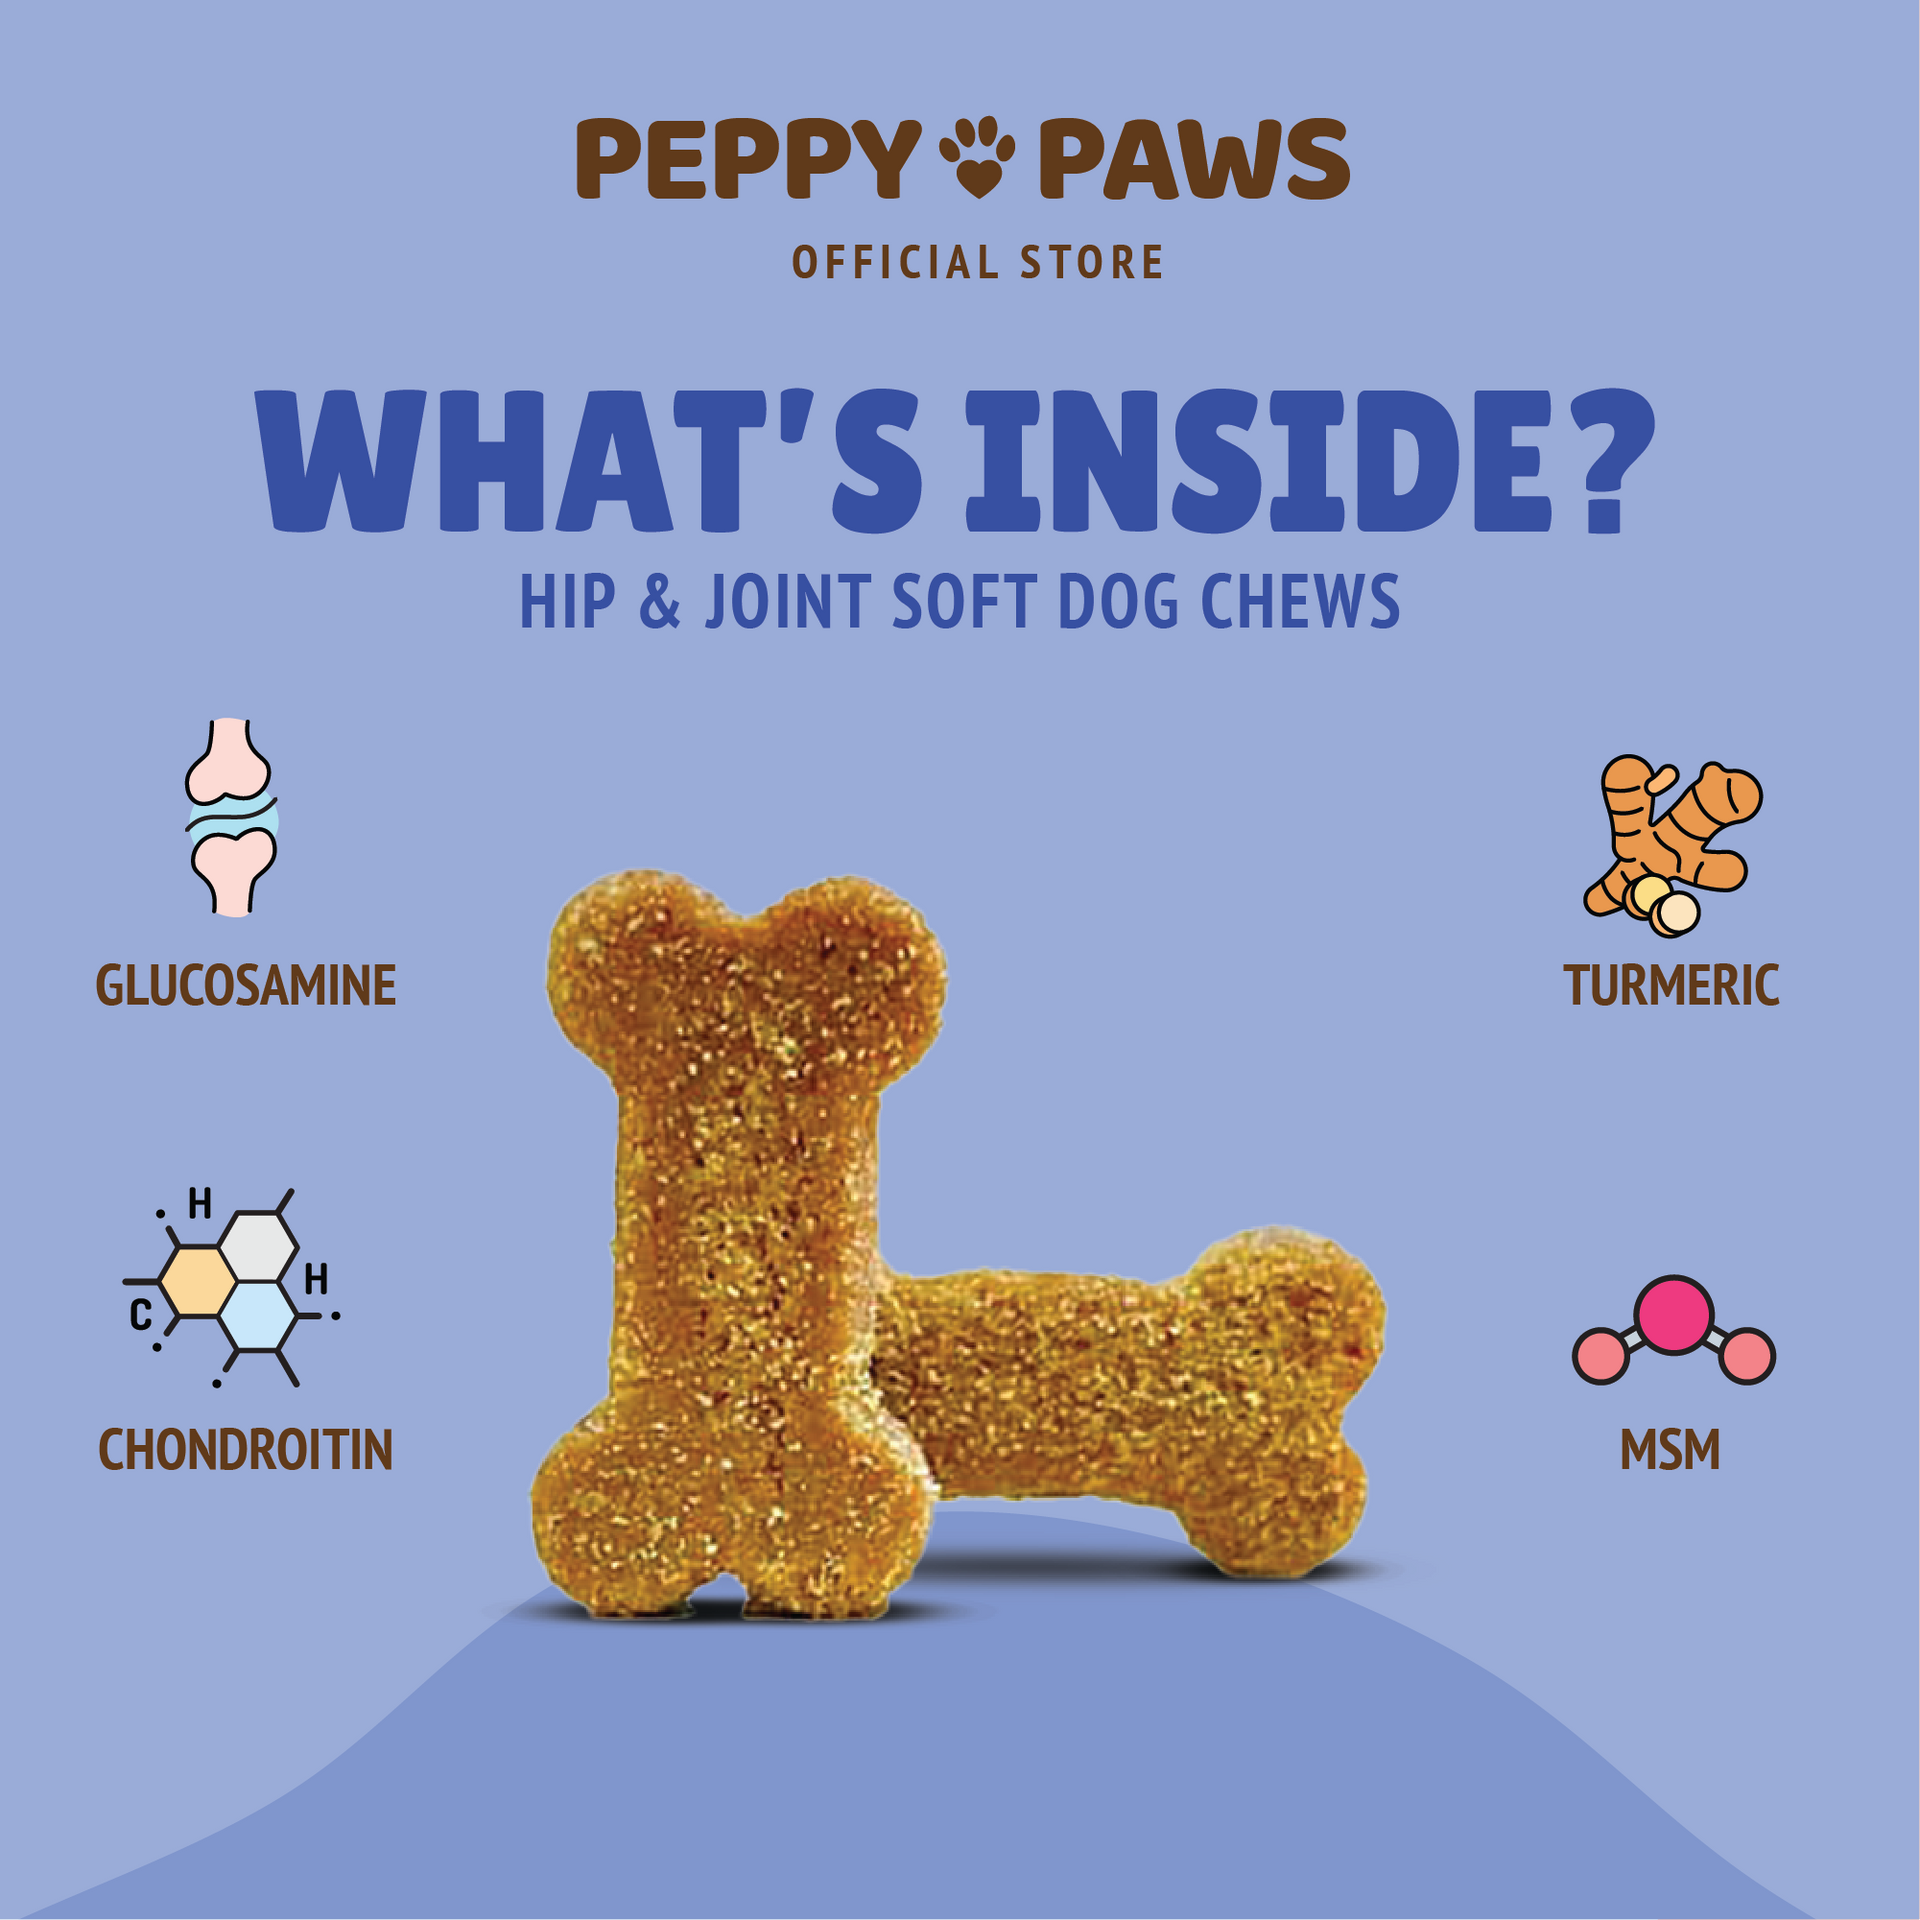 Peppy Paws Hip & Joint Soft Dog Chew (120 Chews)